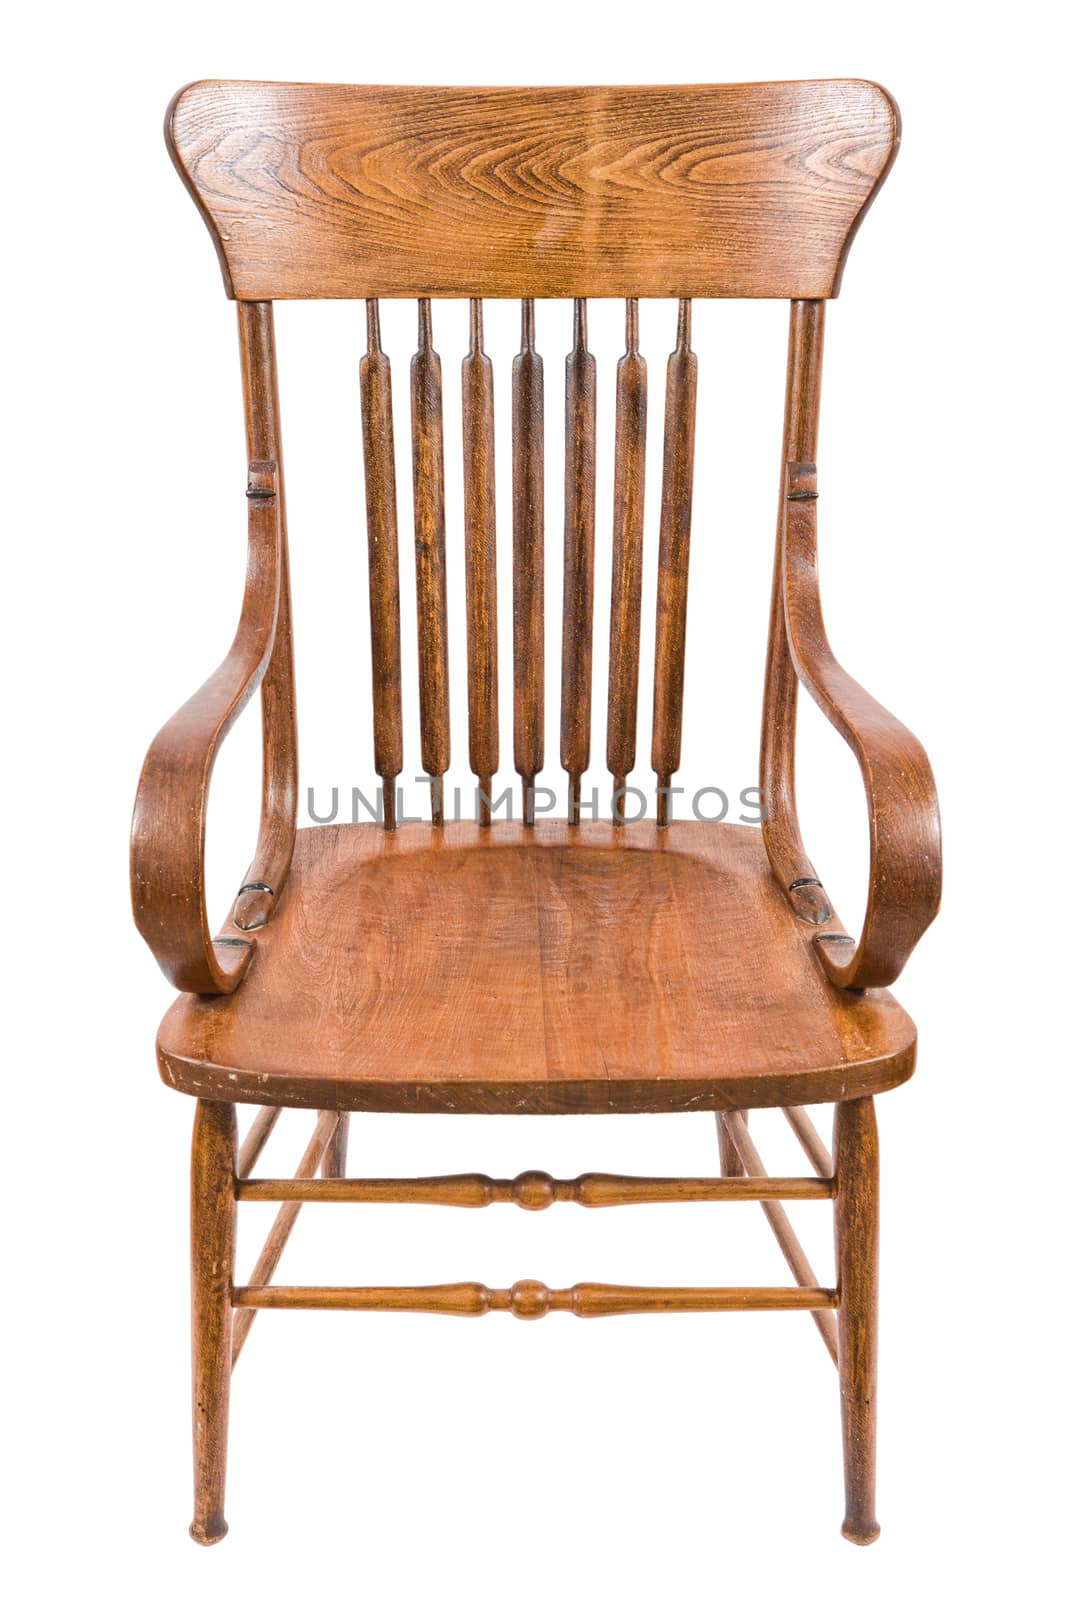 Old wooden chair on an a white background